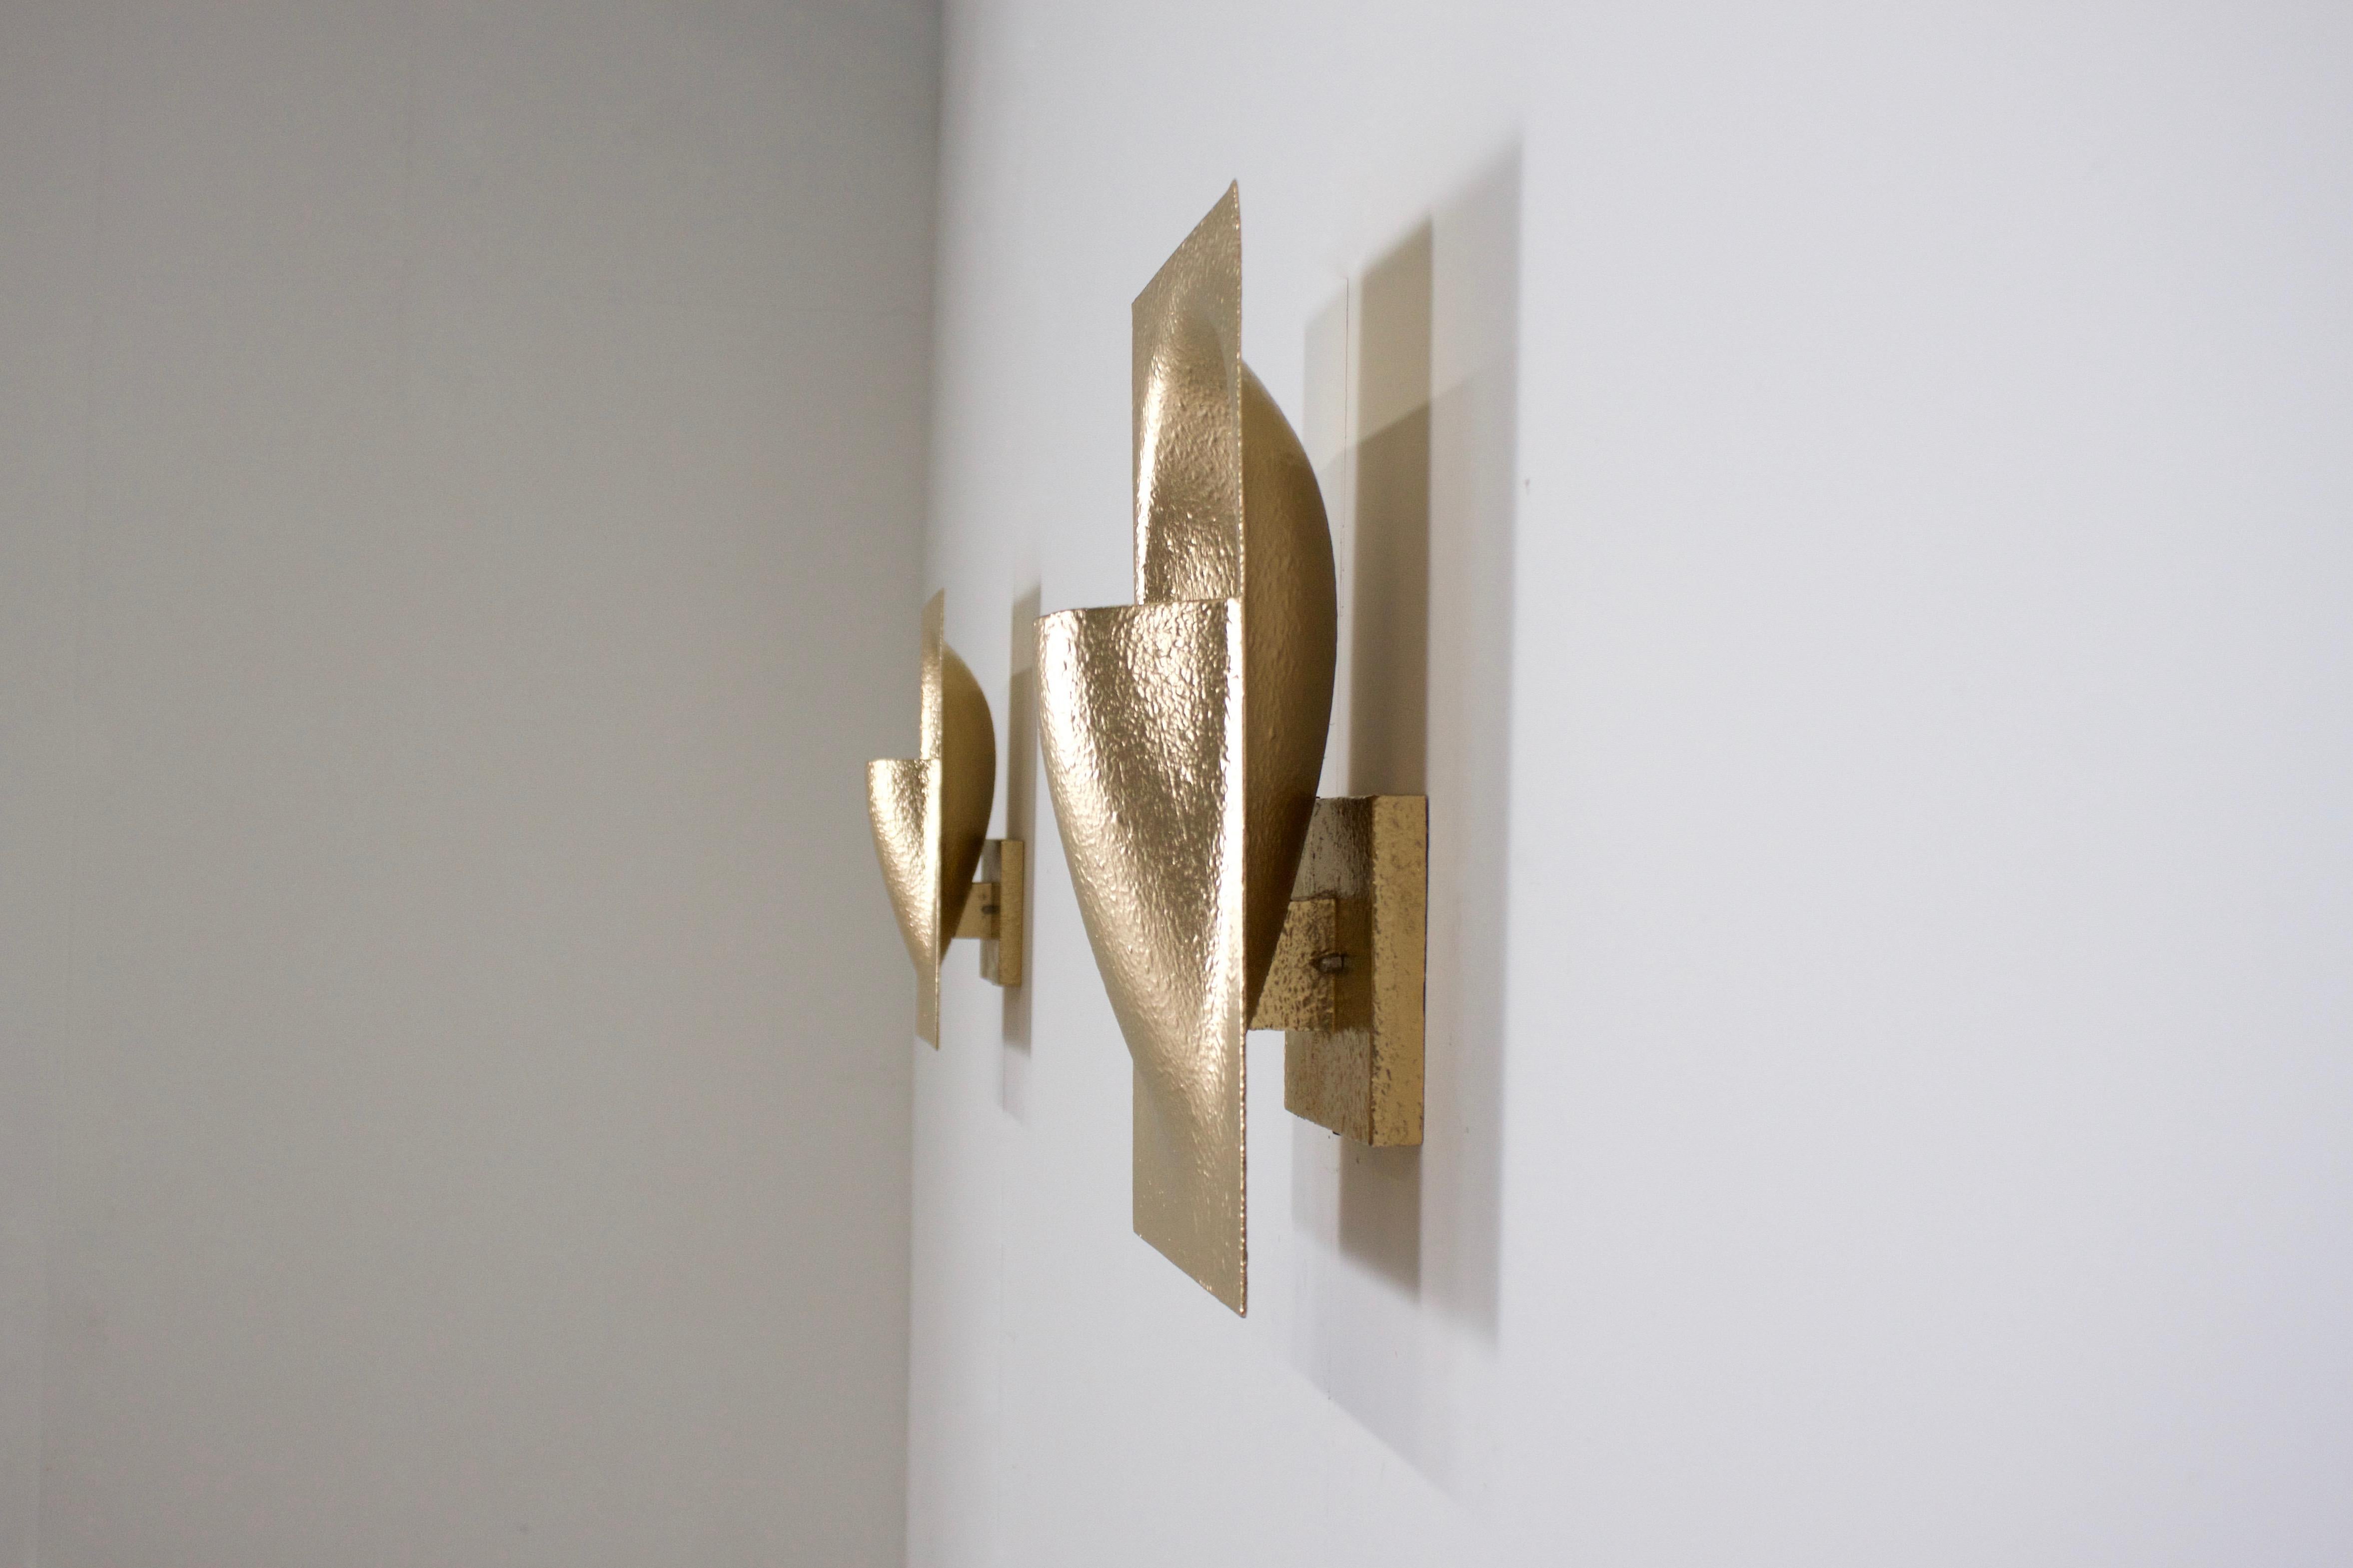 Lacquered Gold Colored ‘Balance’ Sconces by Bertrand Balas for RAAK Amsterdam, 1972